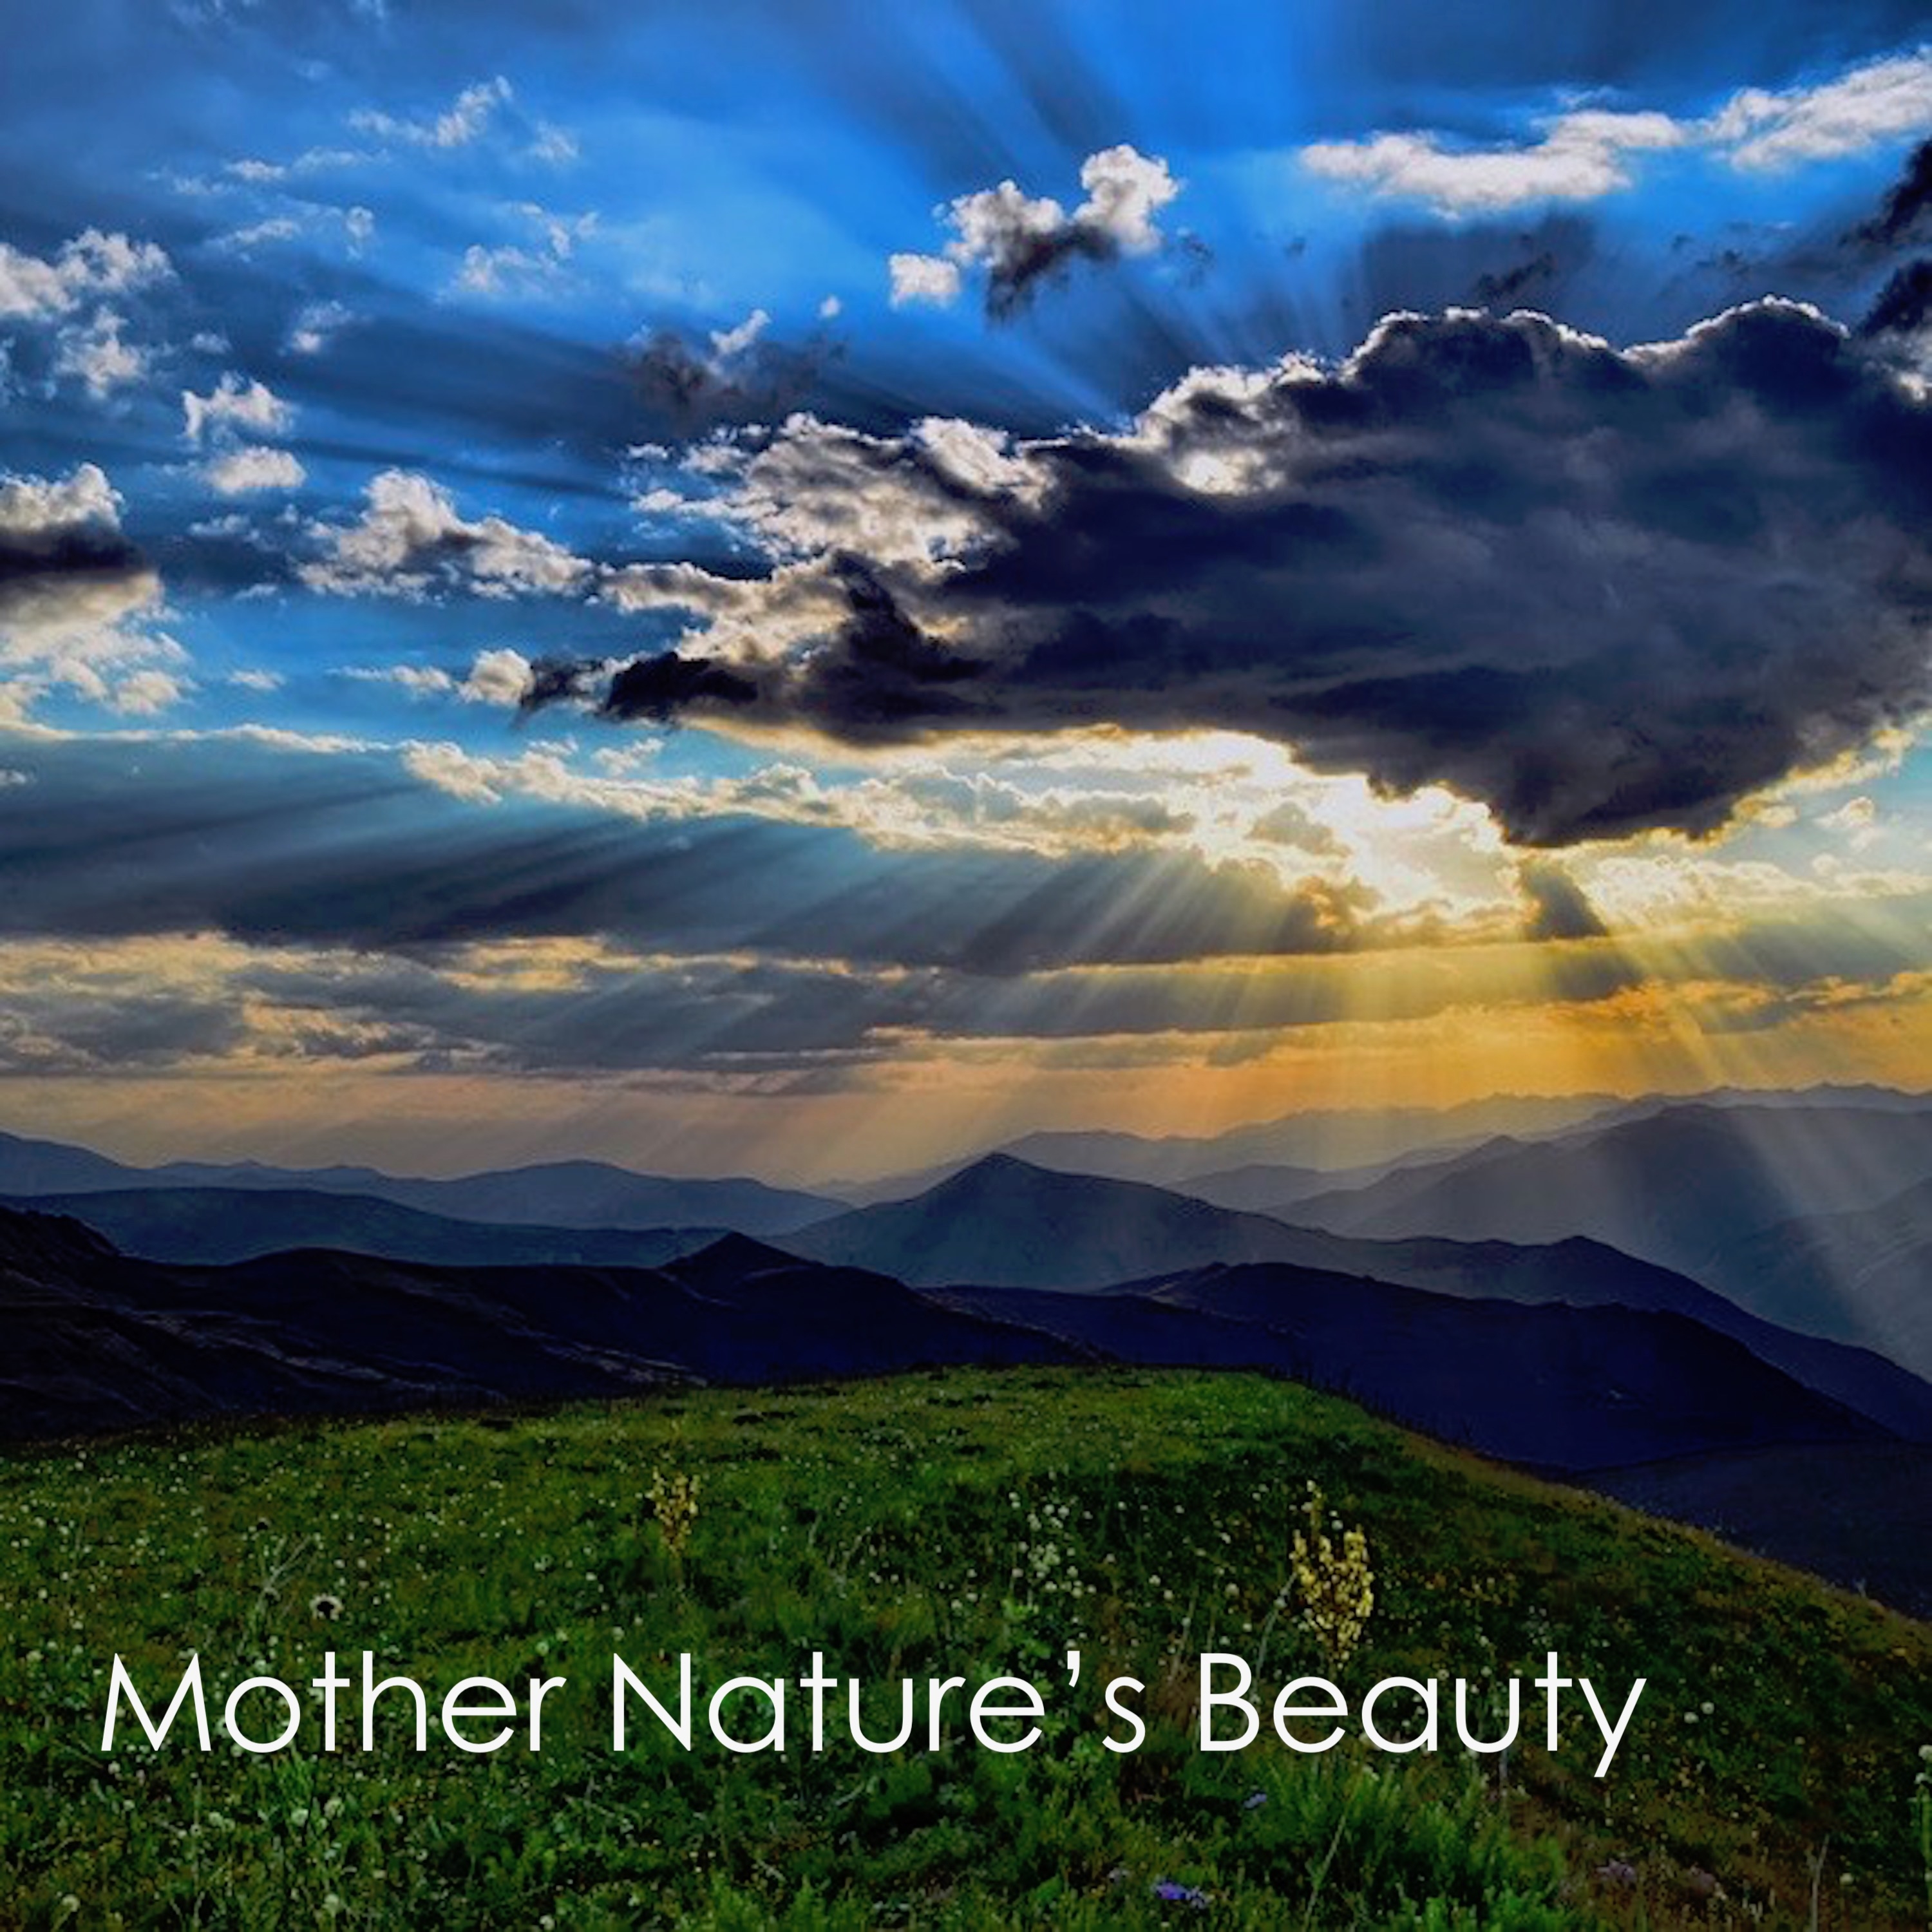 #19 Mother Nature Rain Sounds - A Guide to Meditating, Yoga, Sleeping, Relaxing or White Noise